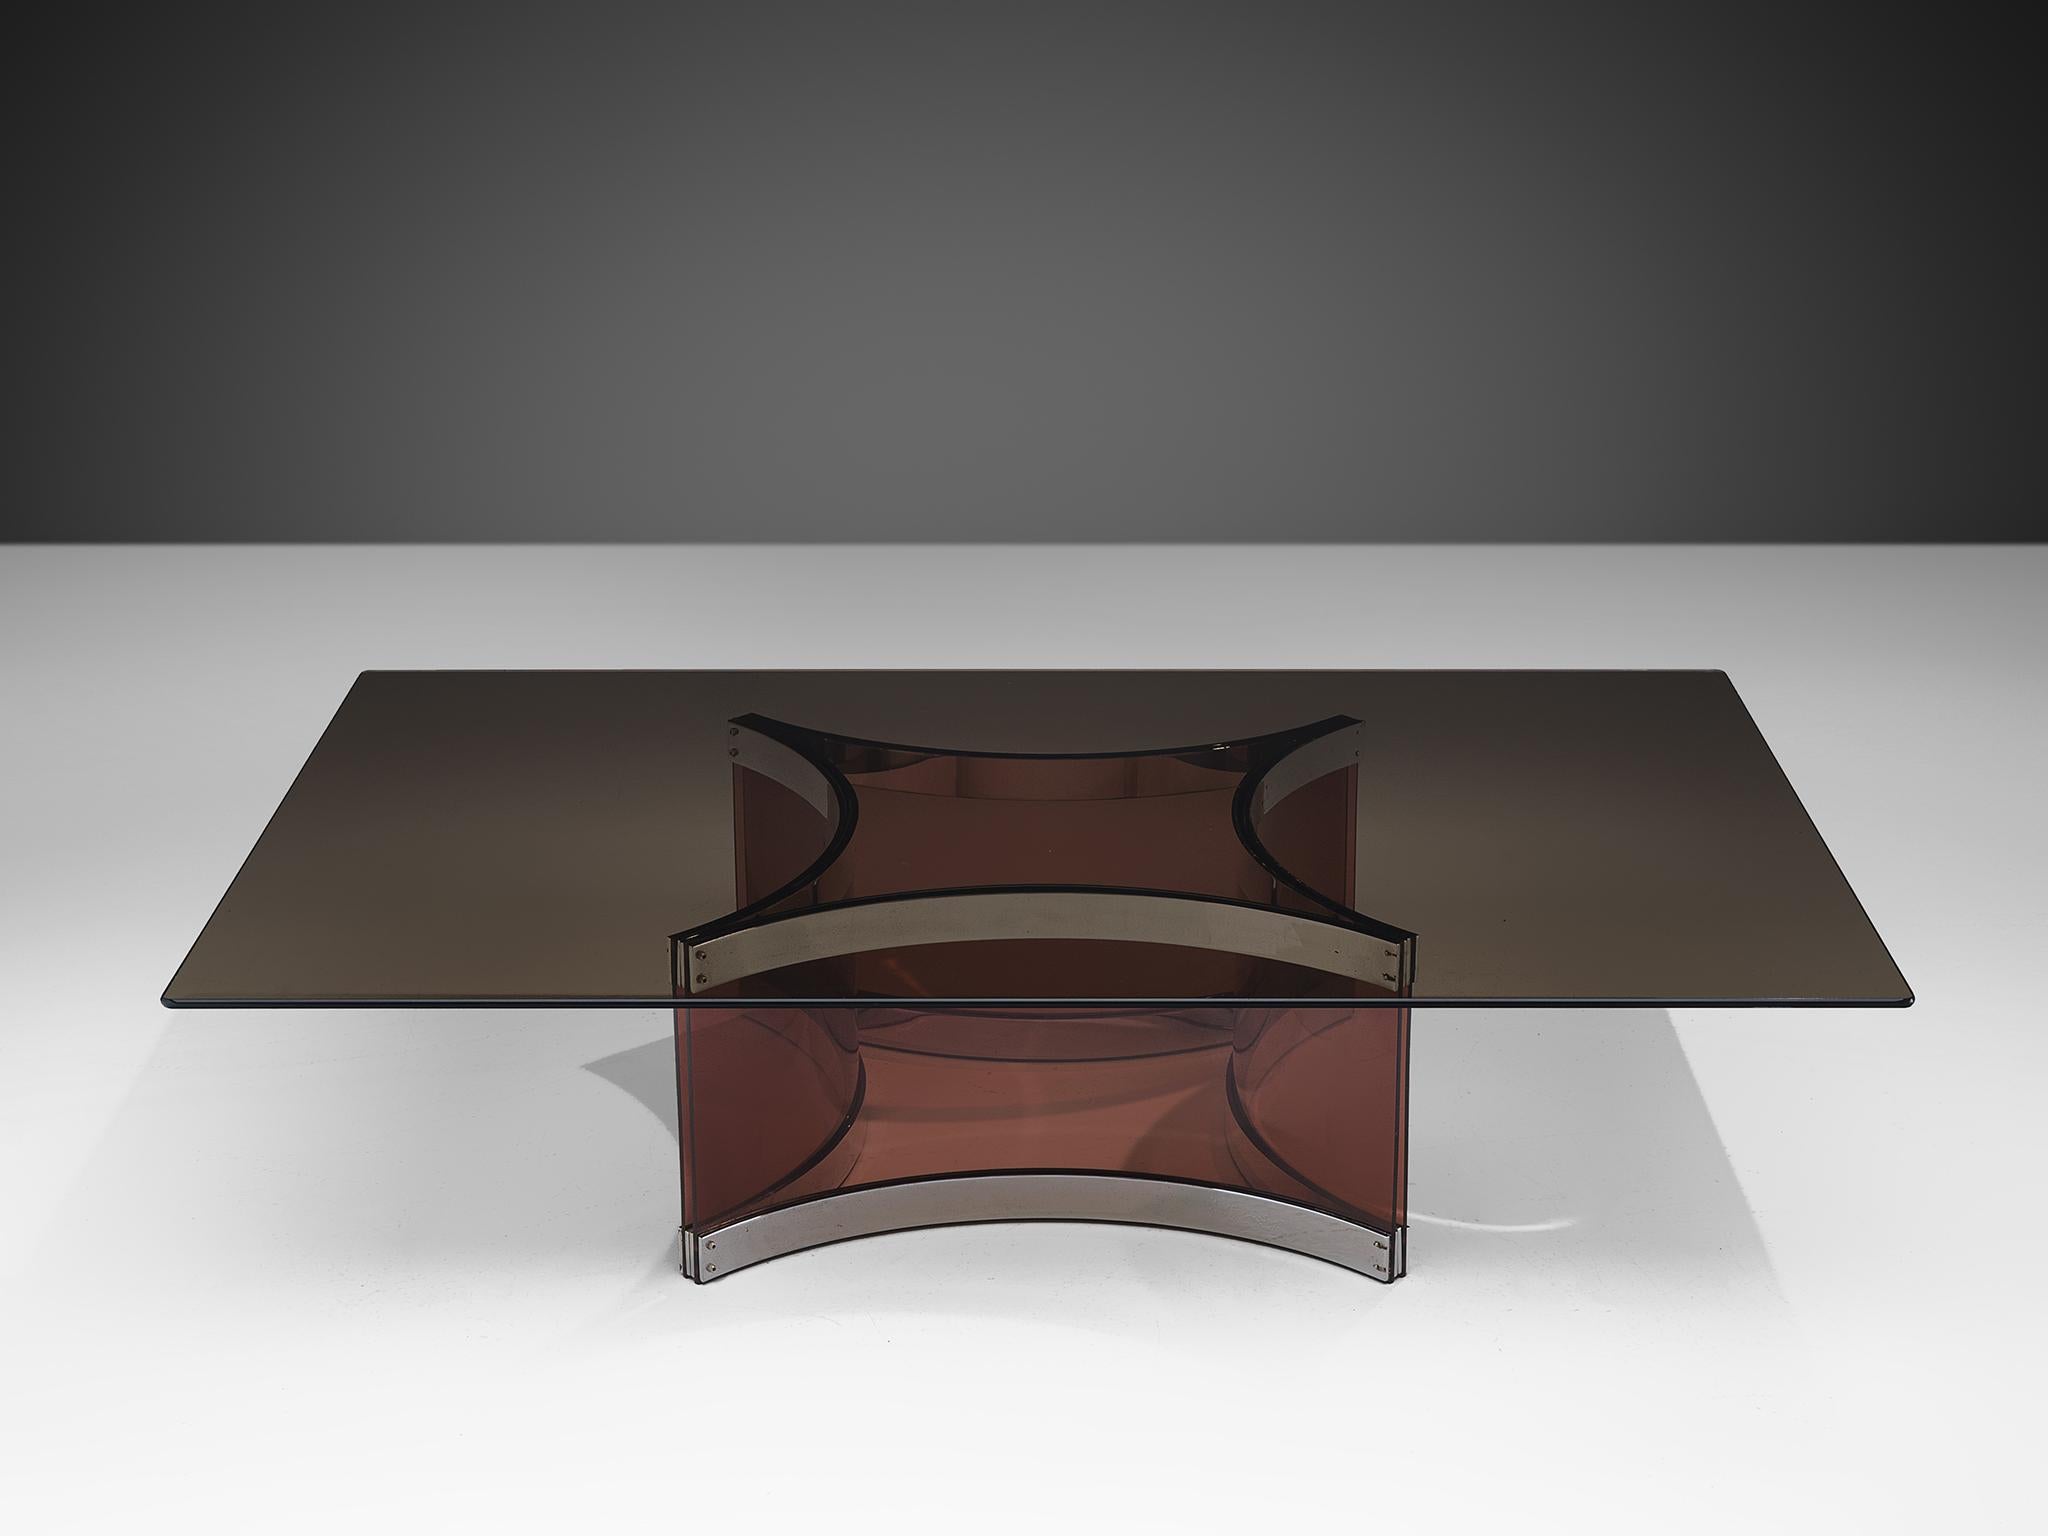 Alessandro Albrizzi, coffee table, glass, Italy, 1960s.

This cocktail table has a bent, cross-shaped base. The top and base were made in two tones of smoked glass. The curved glass segments of the base have chrome metal edges. These elegant